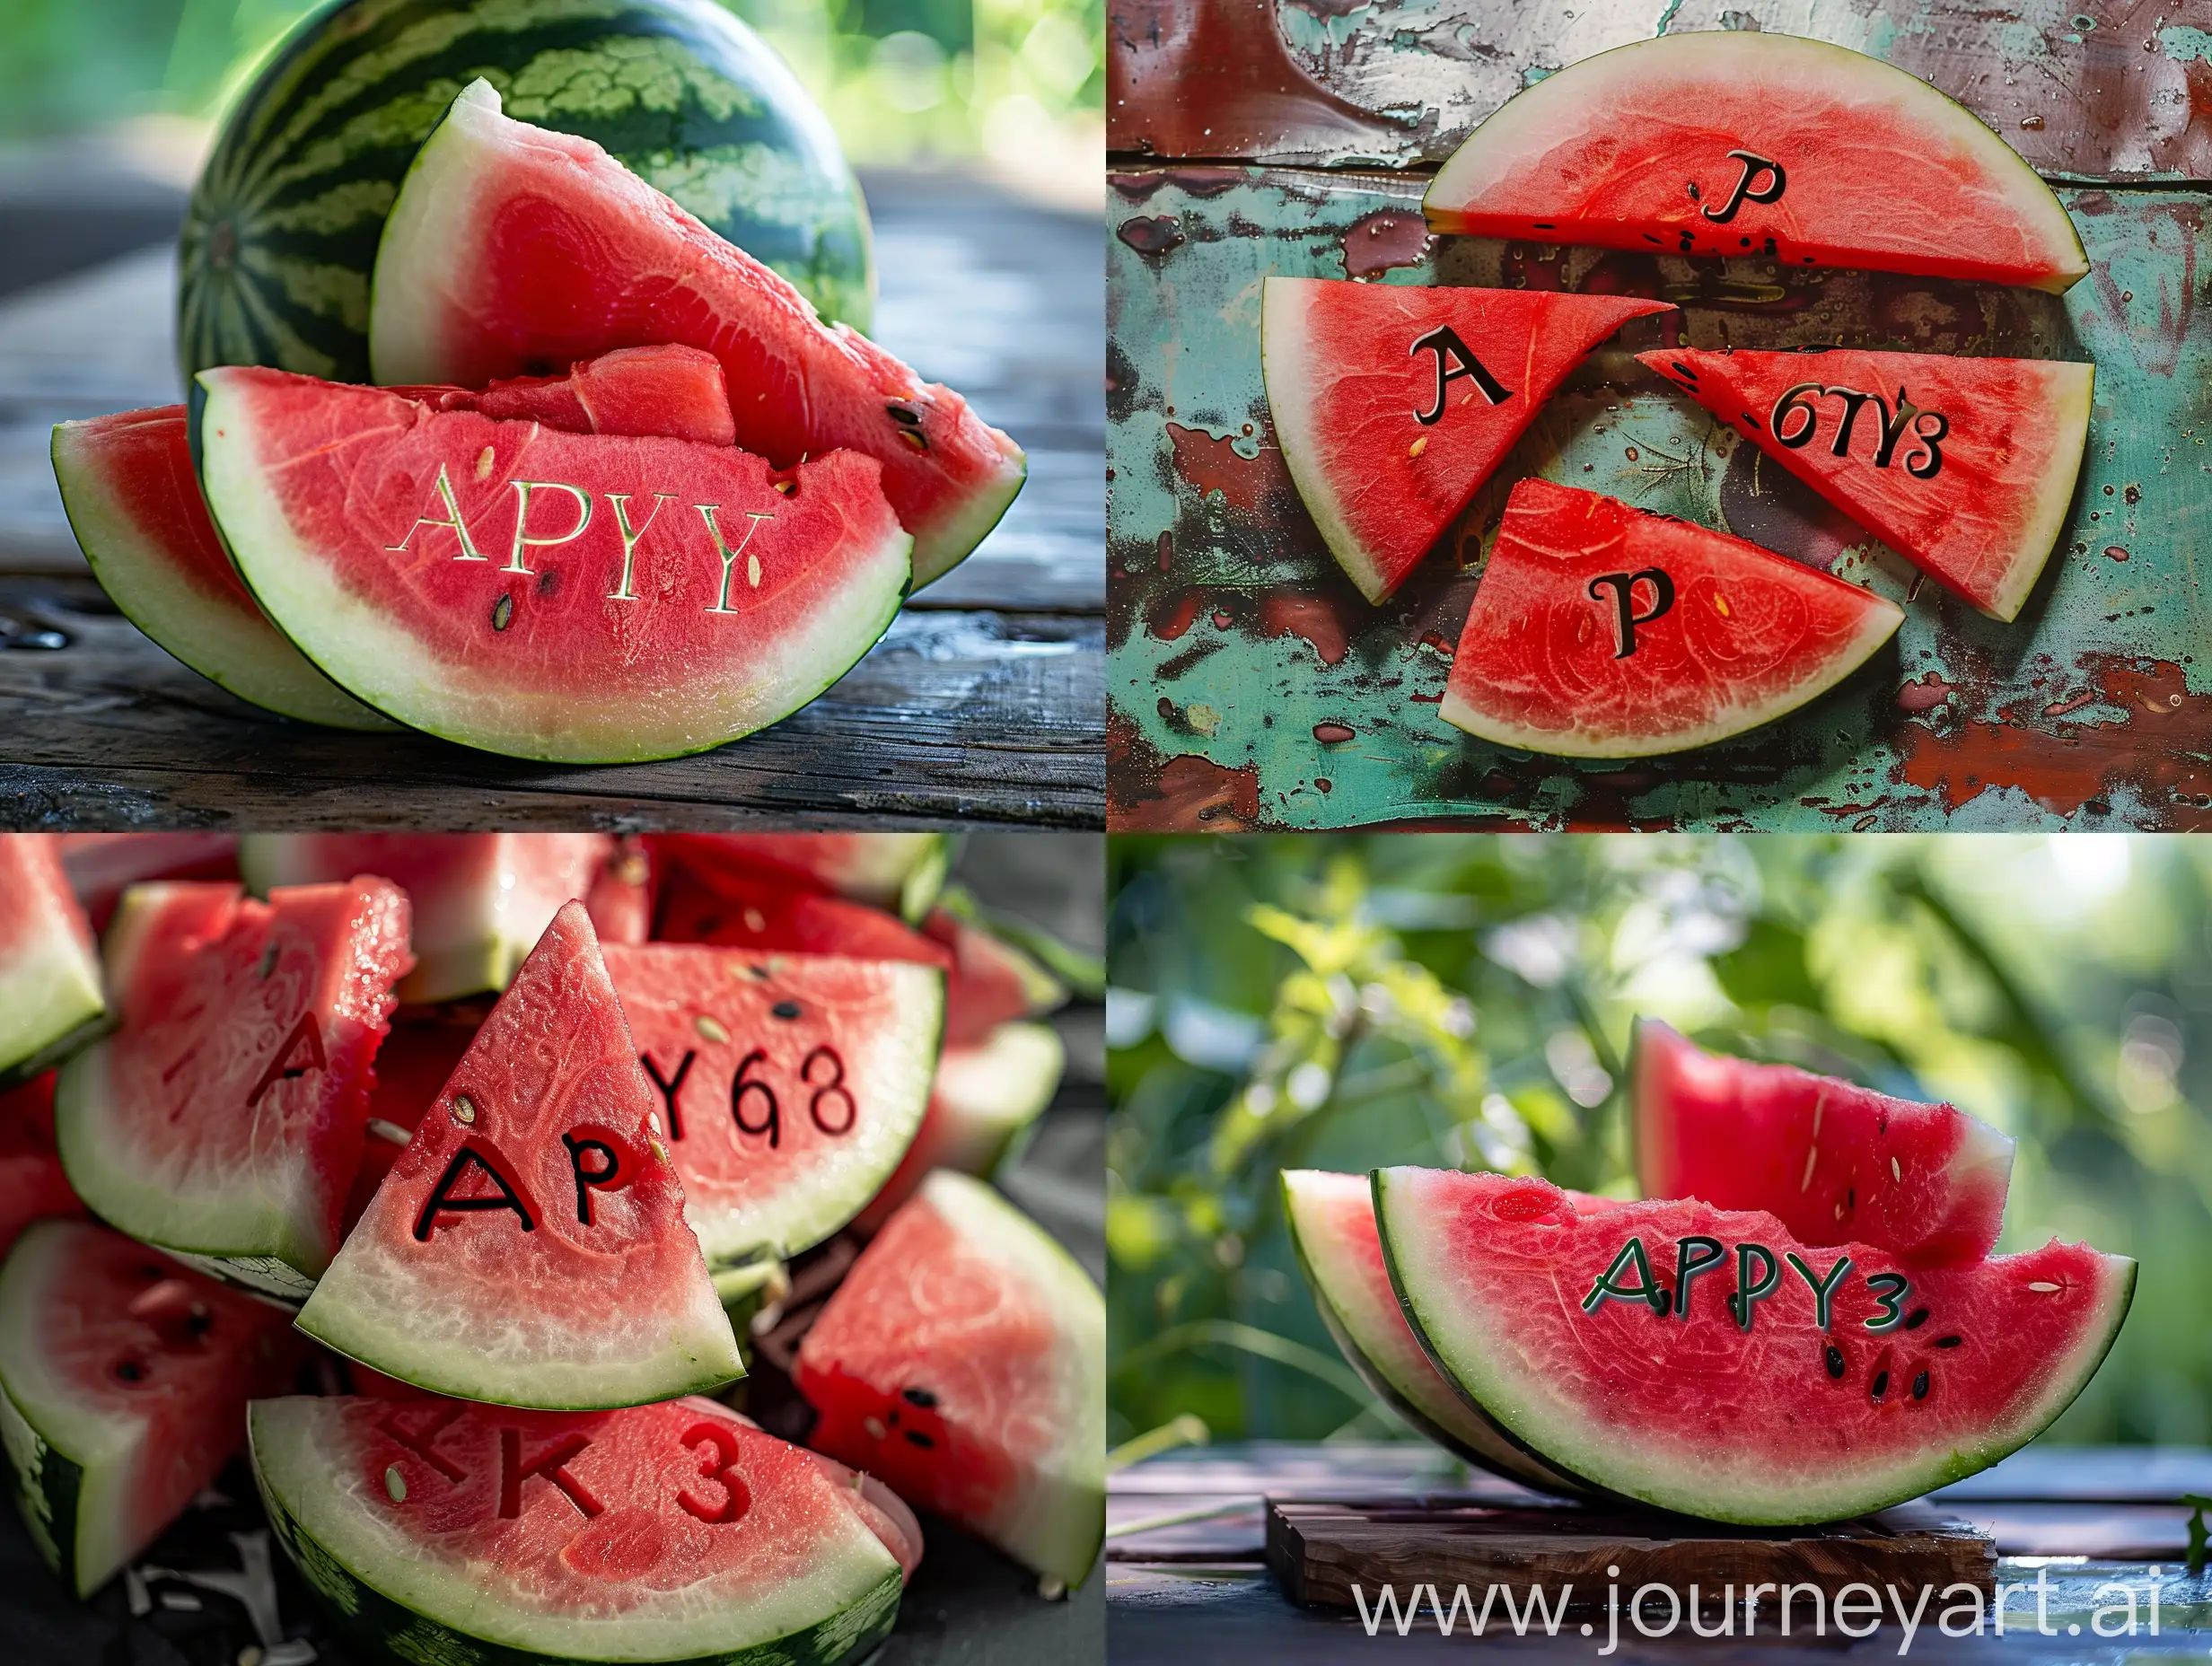 Vibrant-Watermelon-Art-with-Inscribed-Letters